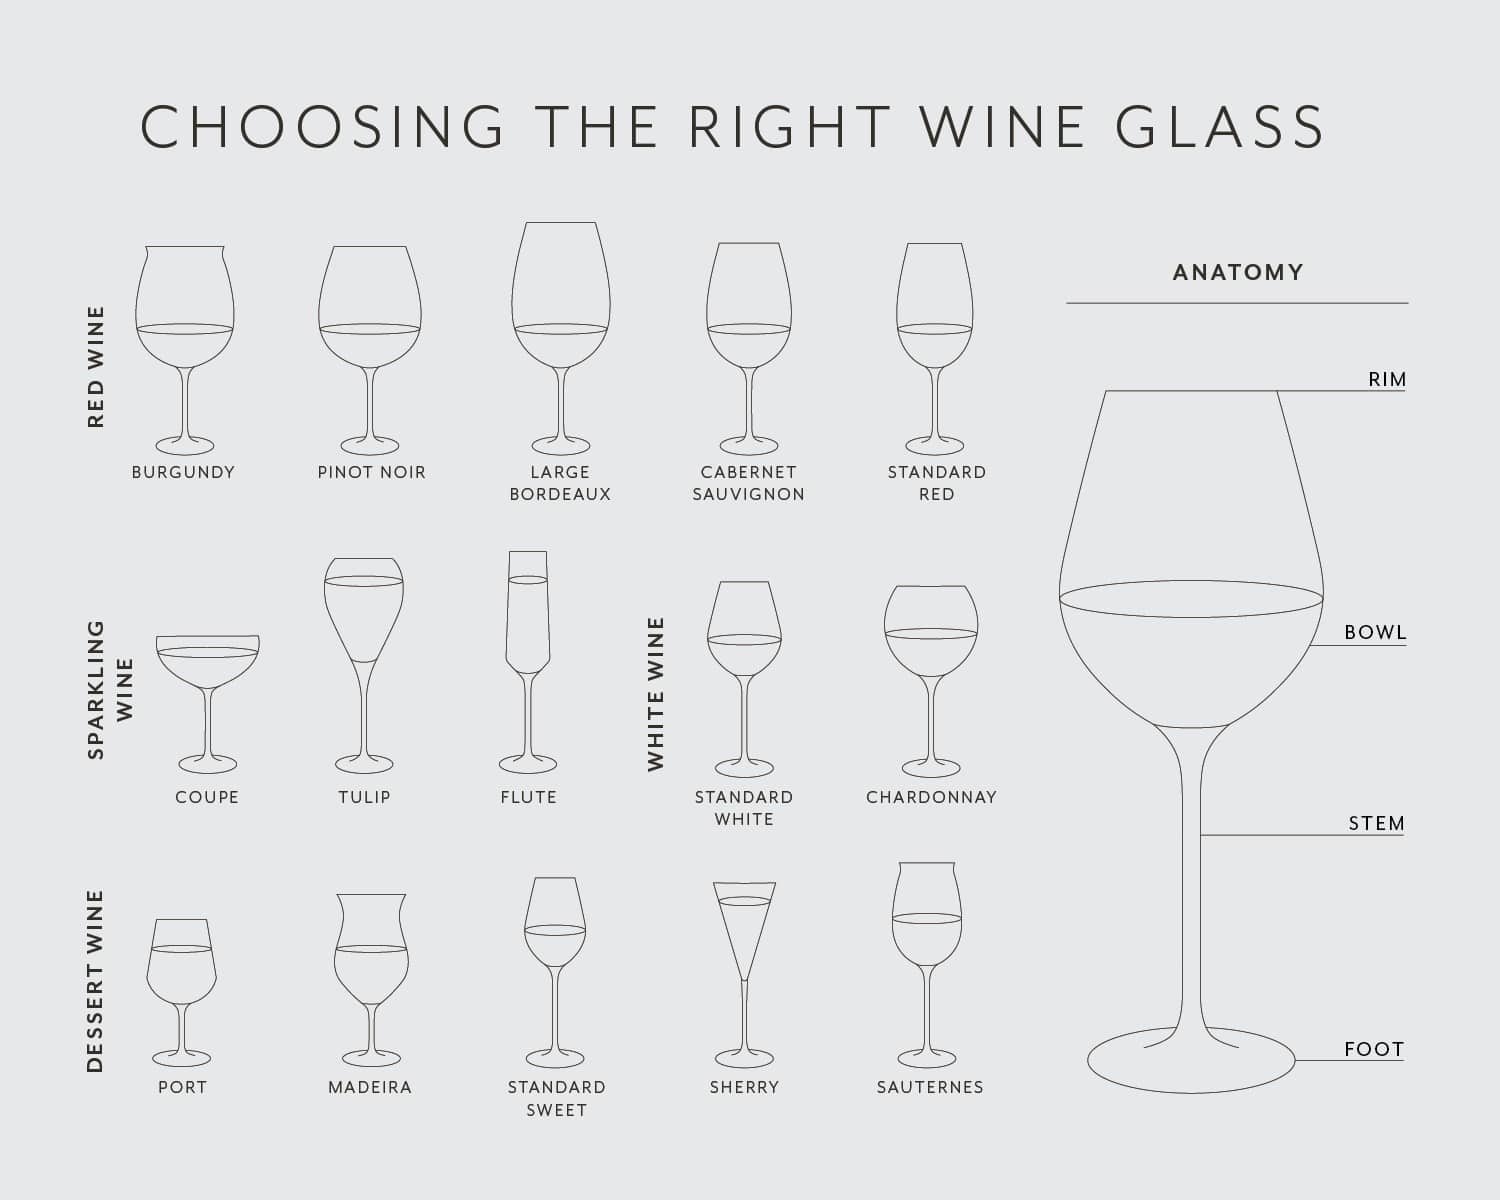 which wine glass infographic